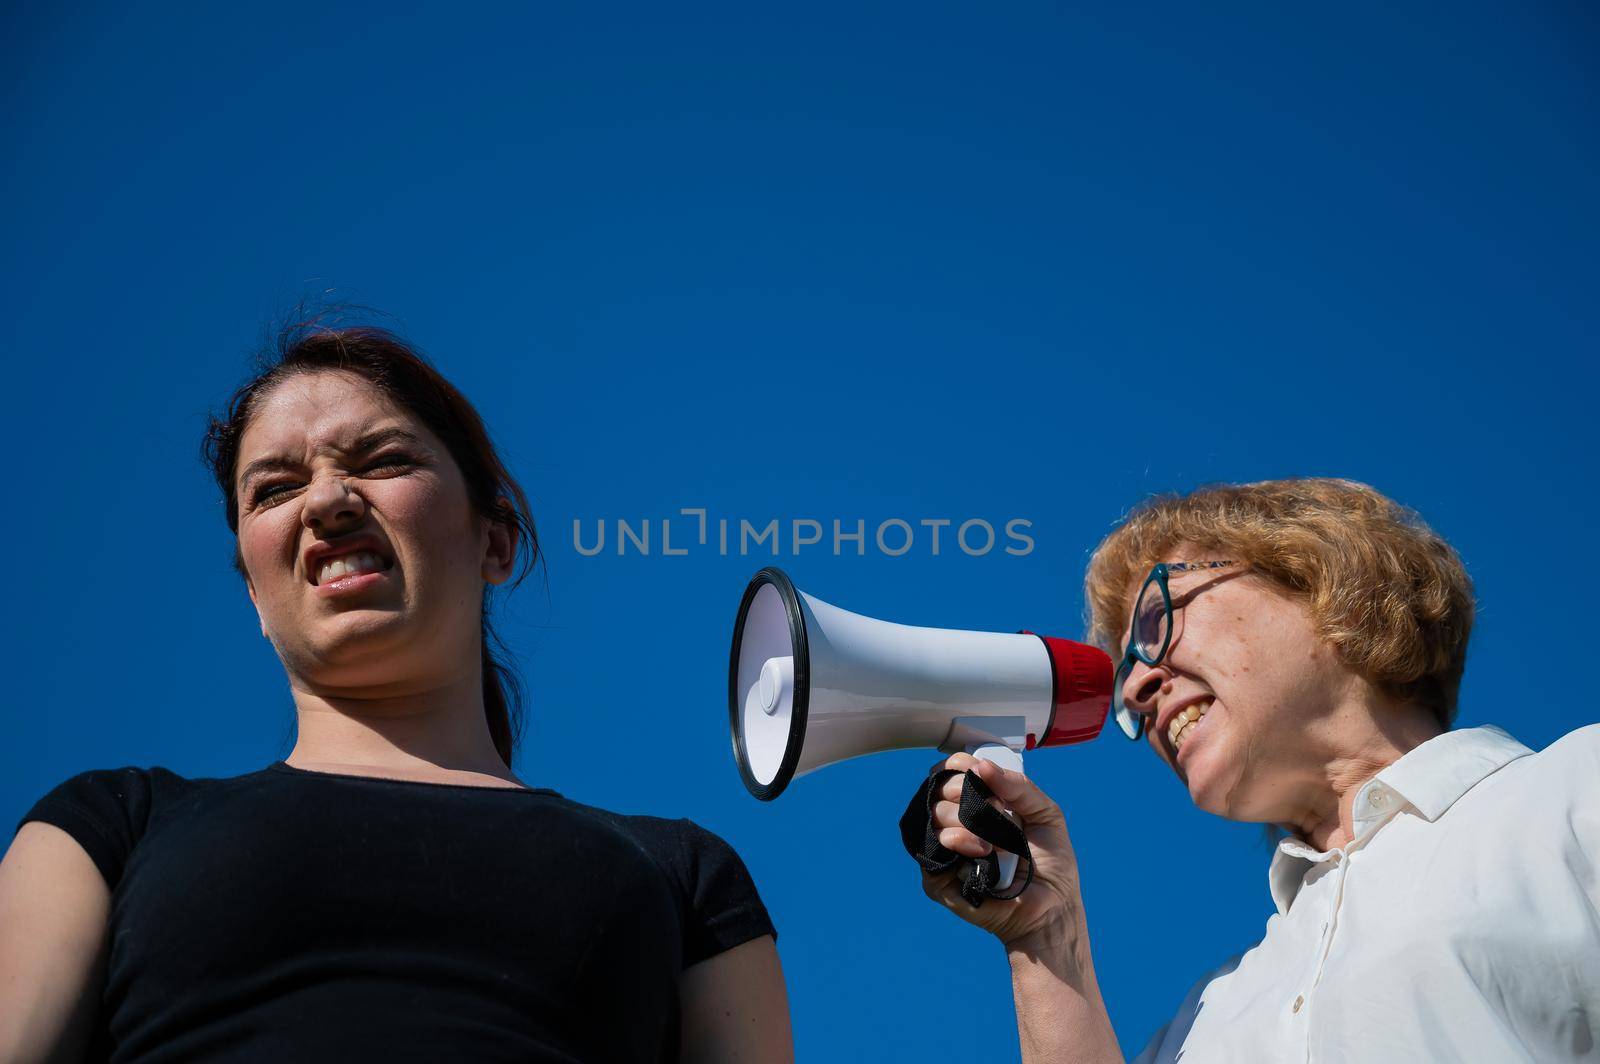 The conflict of generations. An emotional elderly woman shouting at her daughter in a megaphone. An elderly mother swears at a middle-aged woman on a loudspeaker on a blue background